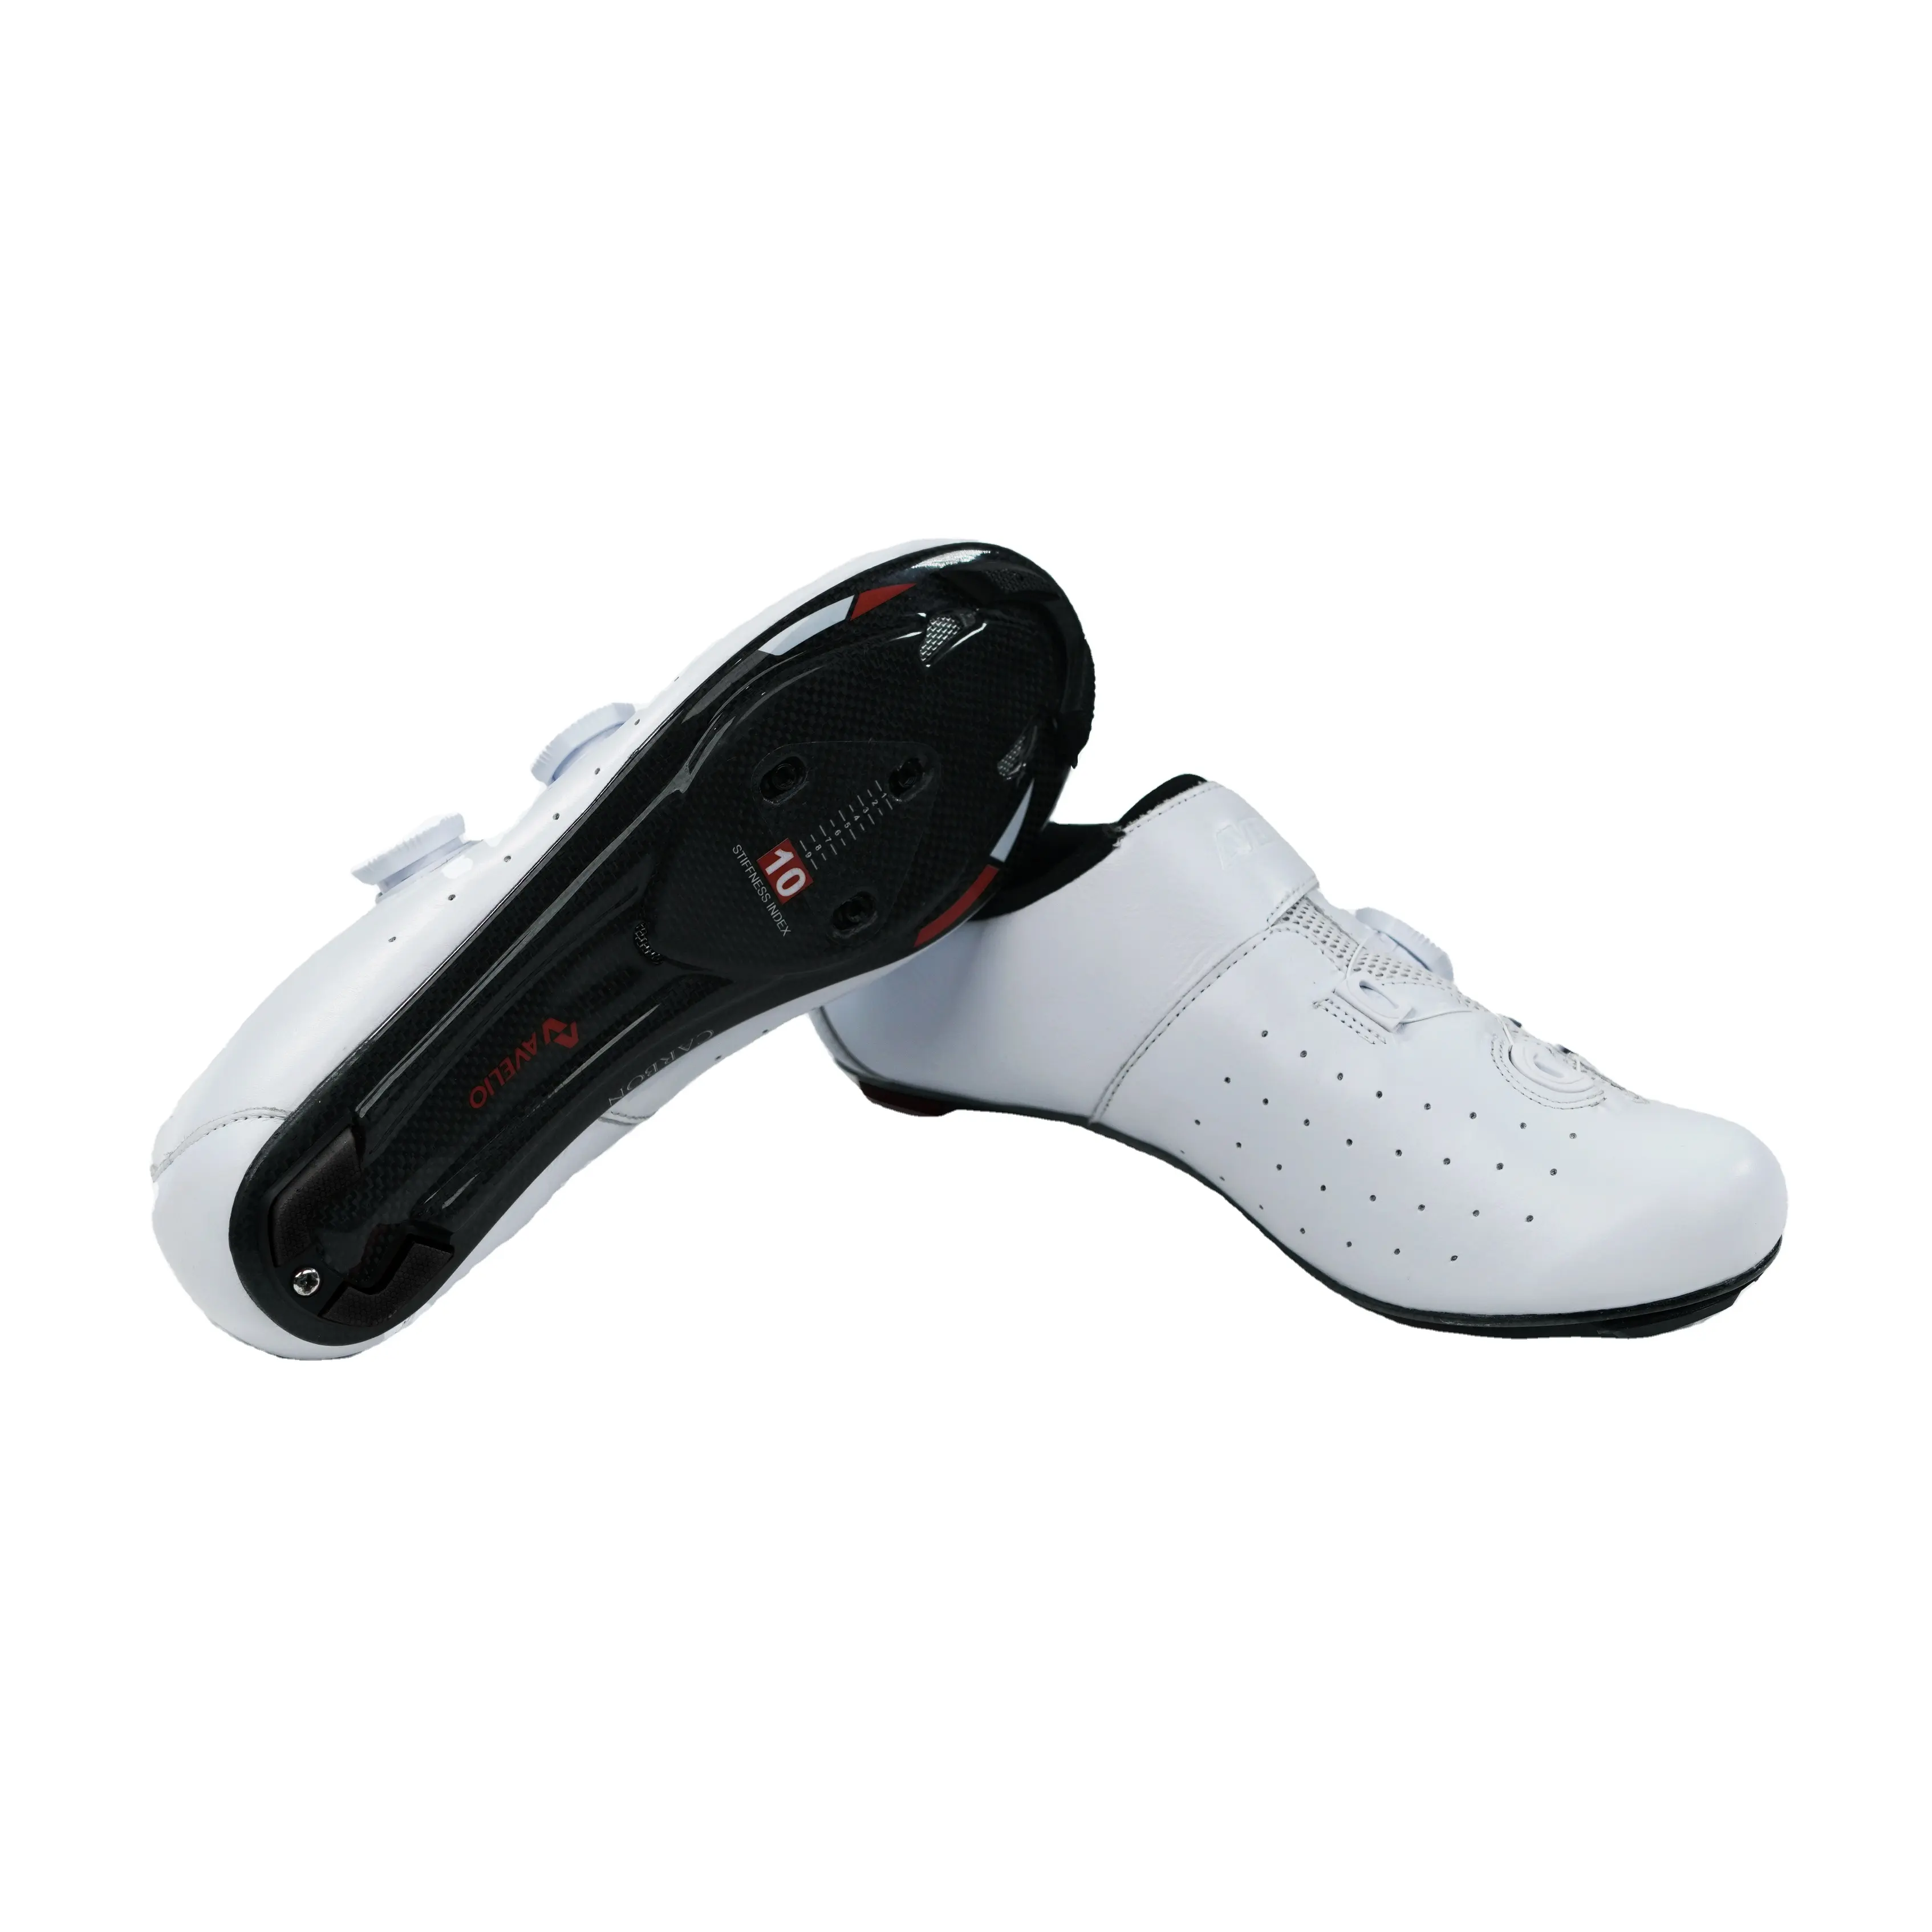 Bicycles Shoe Export Oriented Quality Best Price Carbon Fiber Road Bike Cycling Shoes from Indonesia